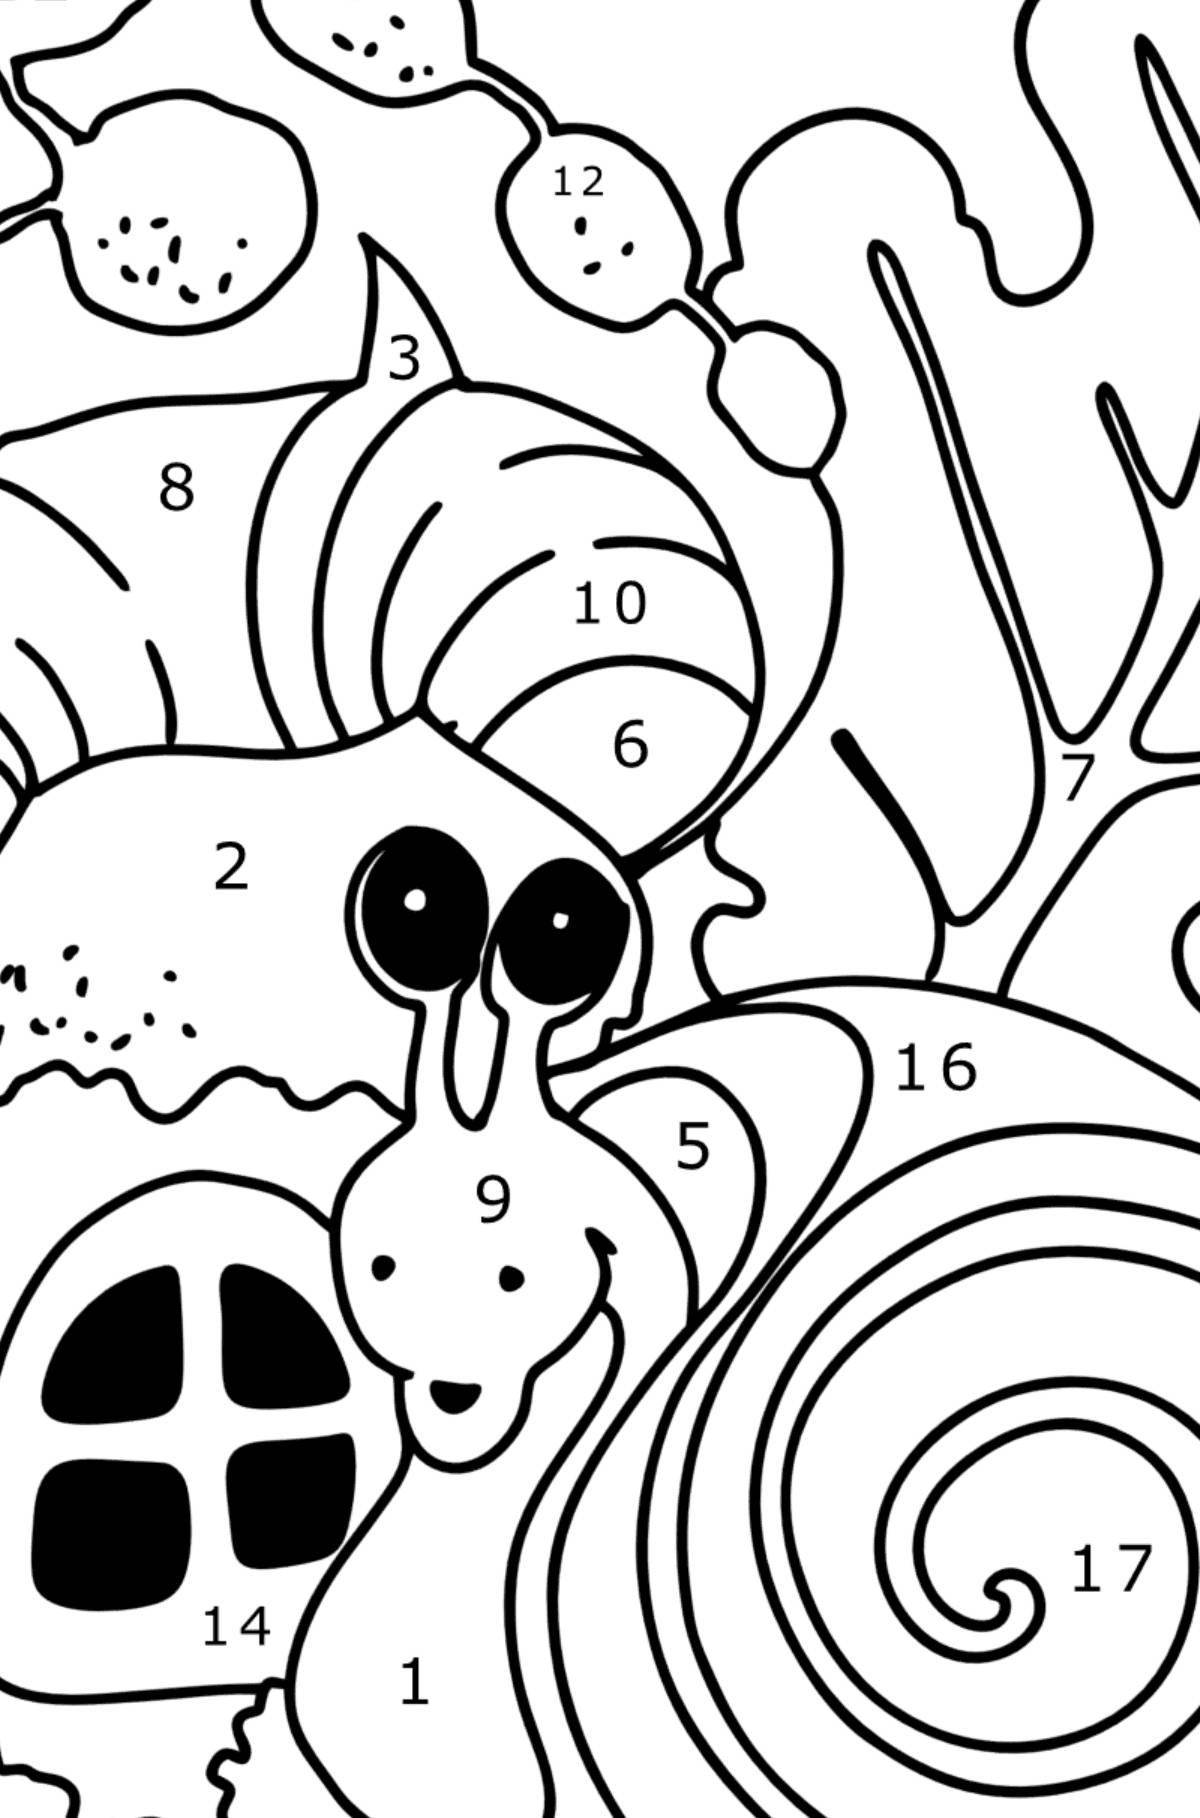 Fancy snail coloring book for kids 5-6 years old